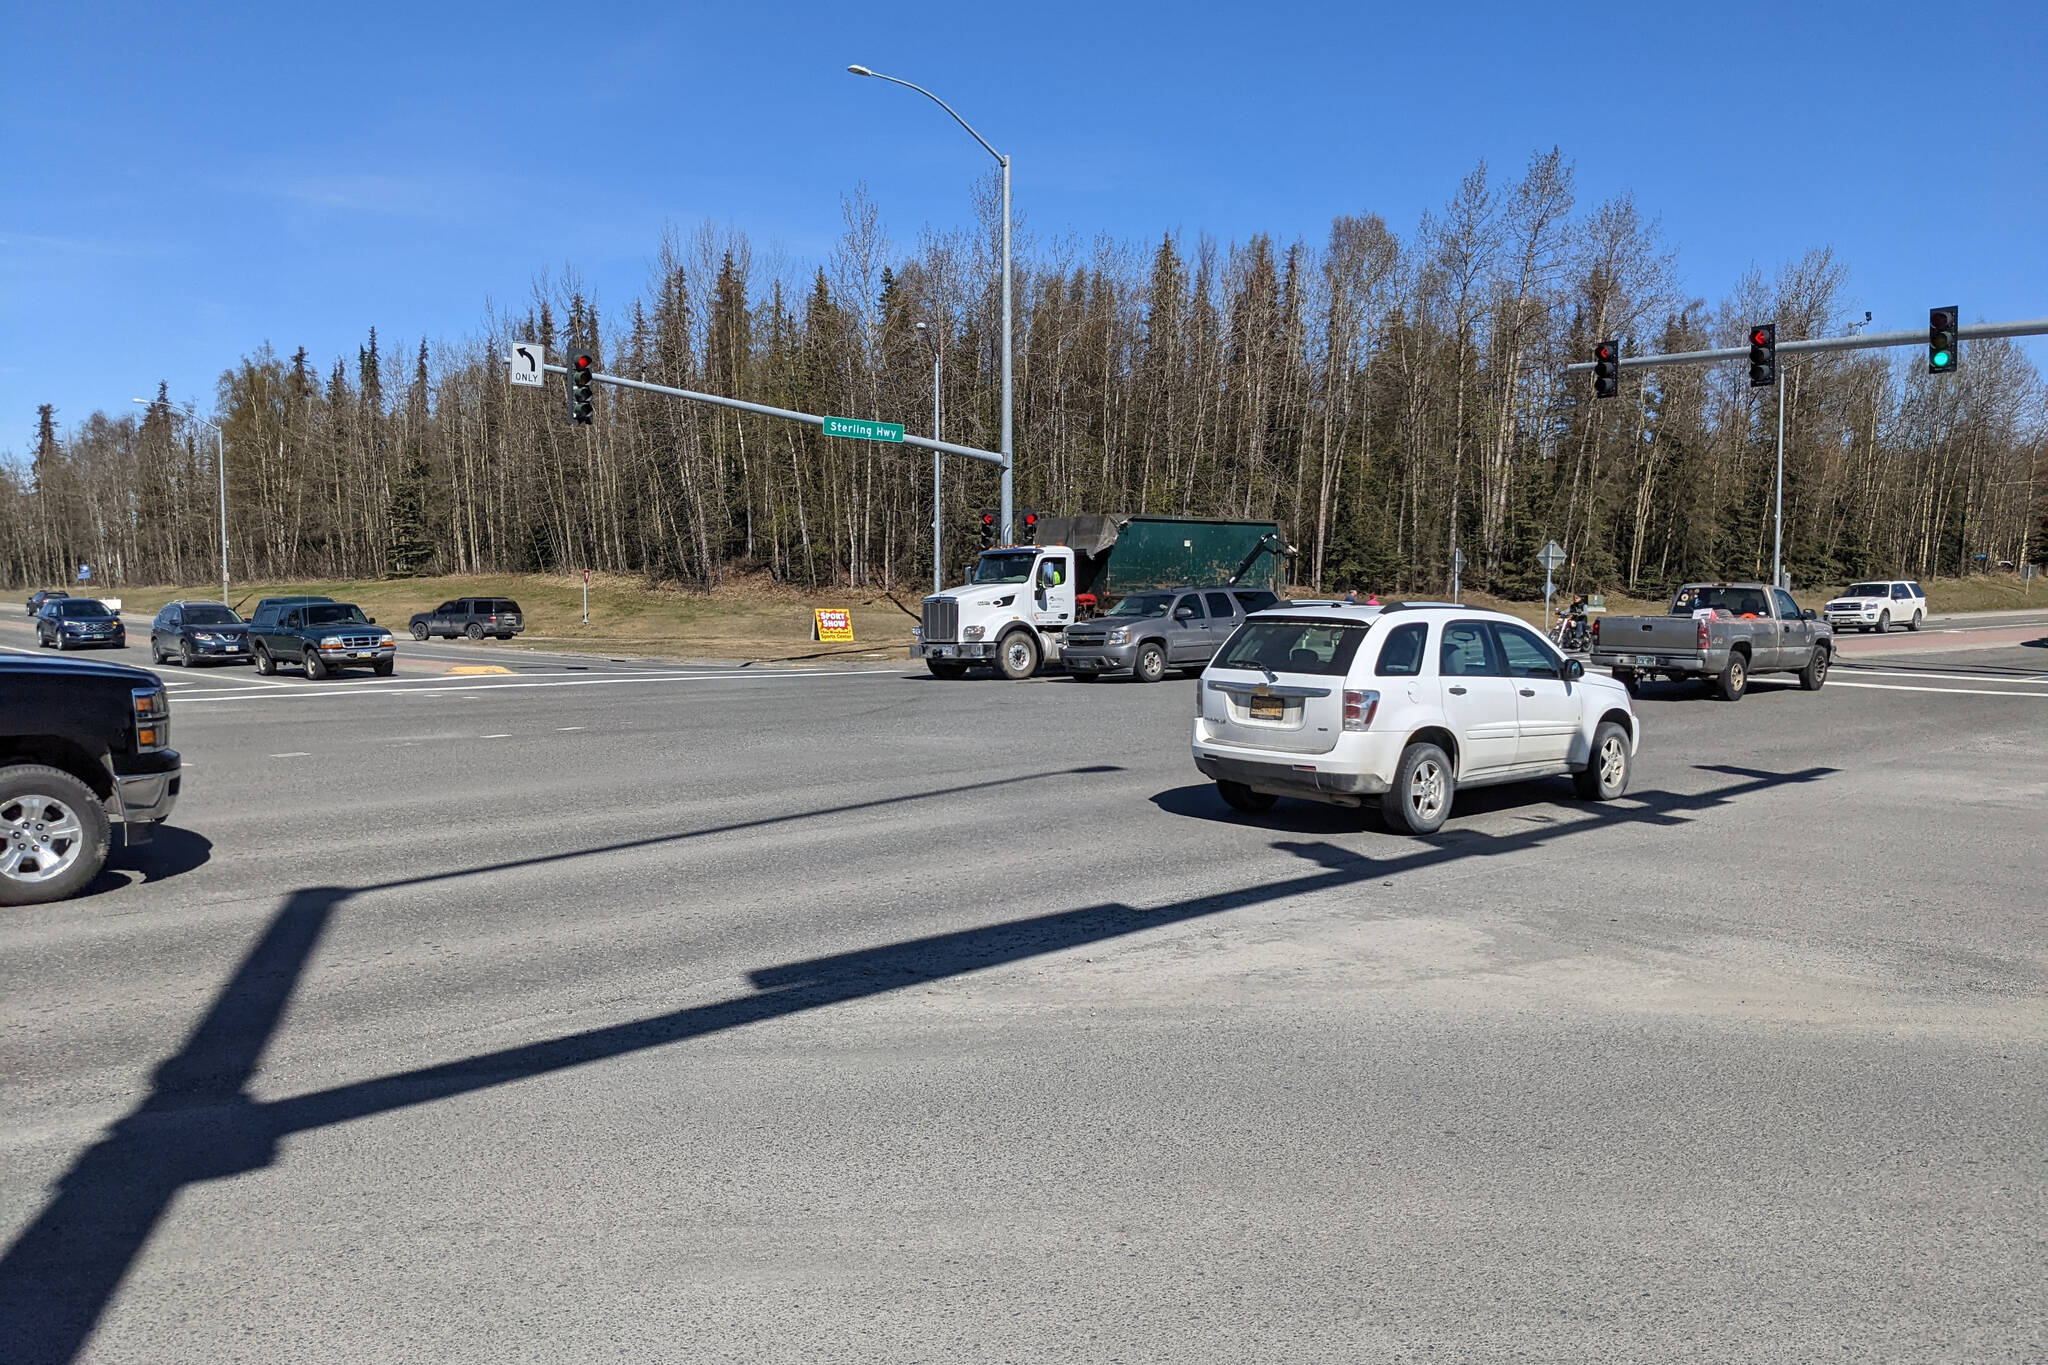 The intersection of the Kenai Spur and Sterling highways is seen on Saturday, May 7, 2022, in Soldotna, Alaska. (Peninsula Clarion file photo)